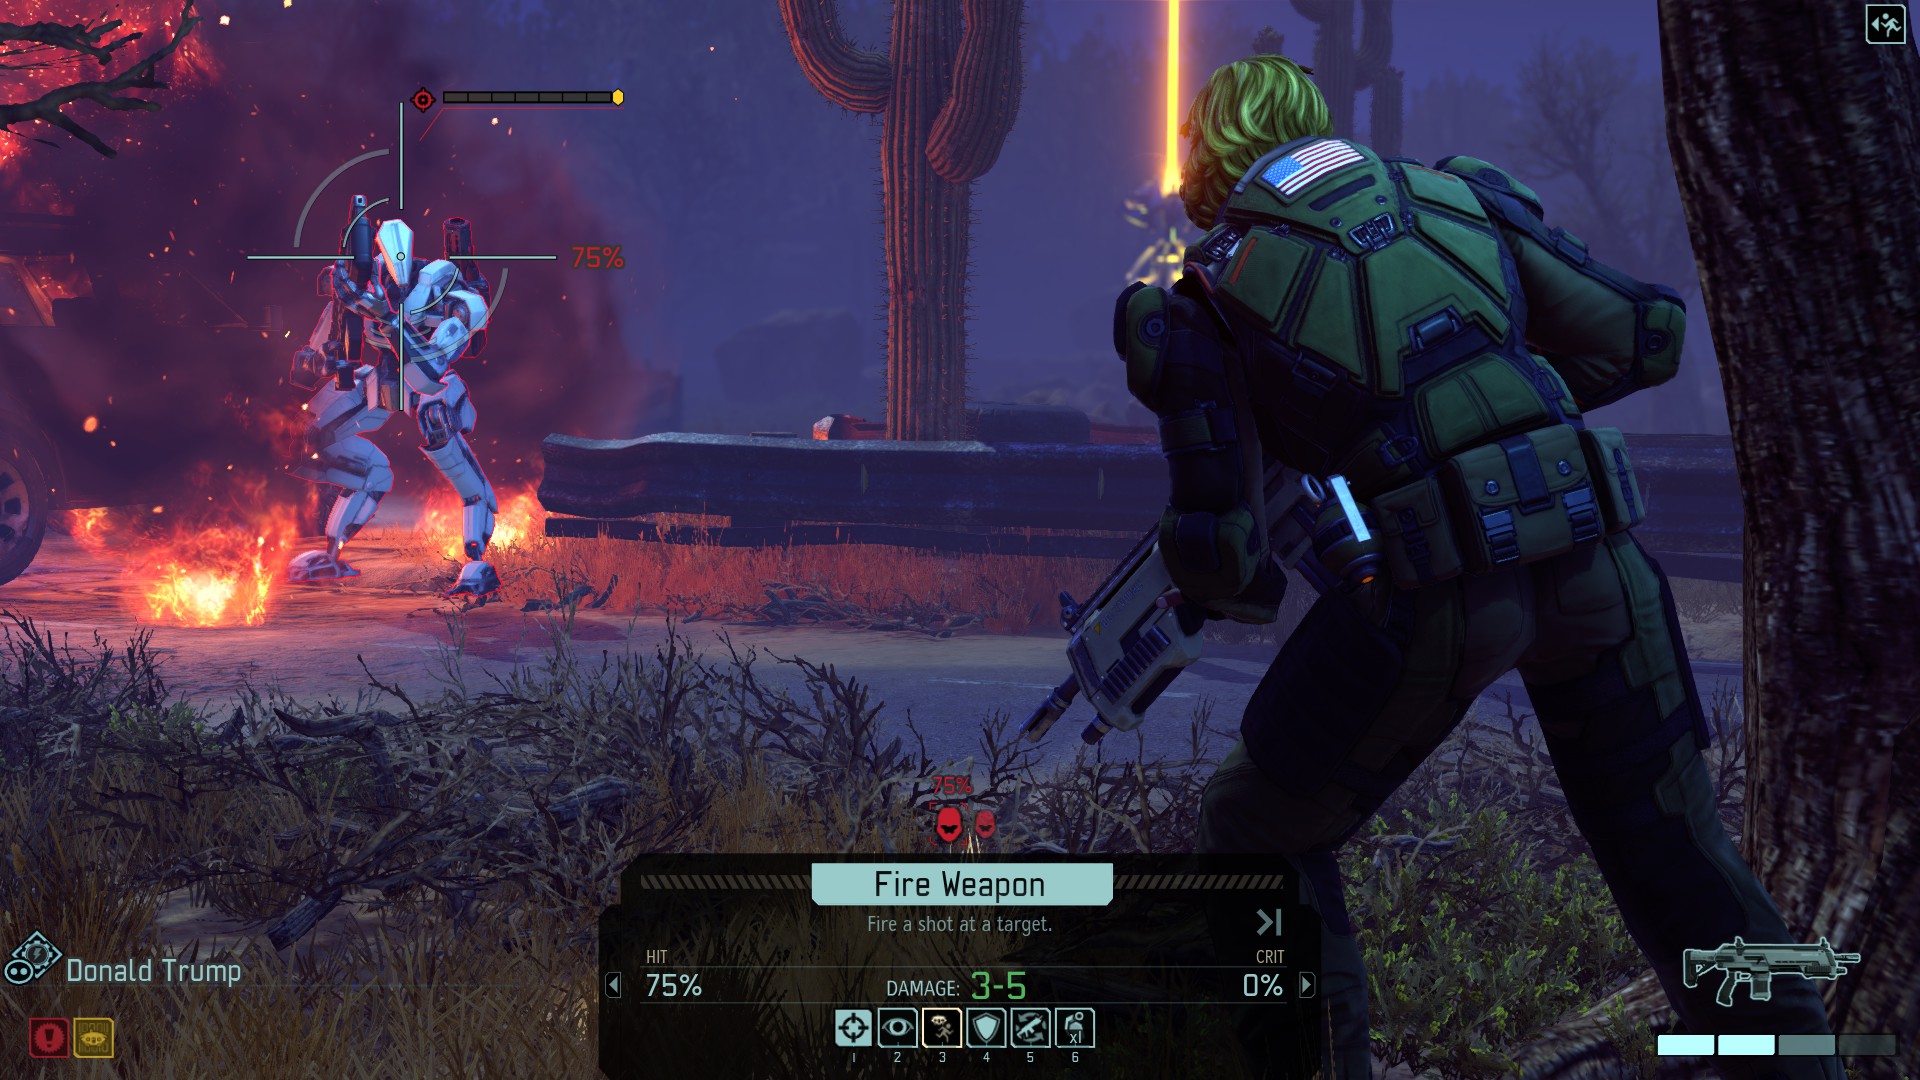 why is xcom 2 pc only